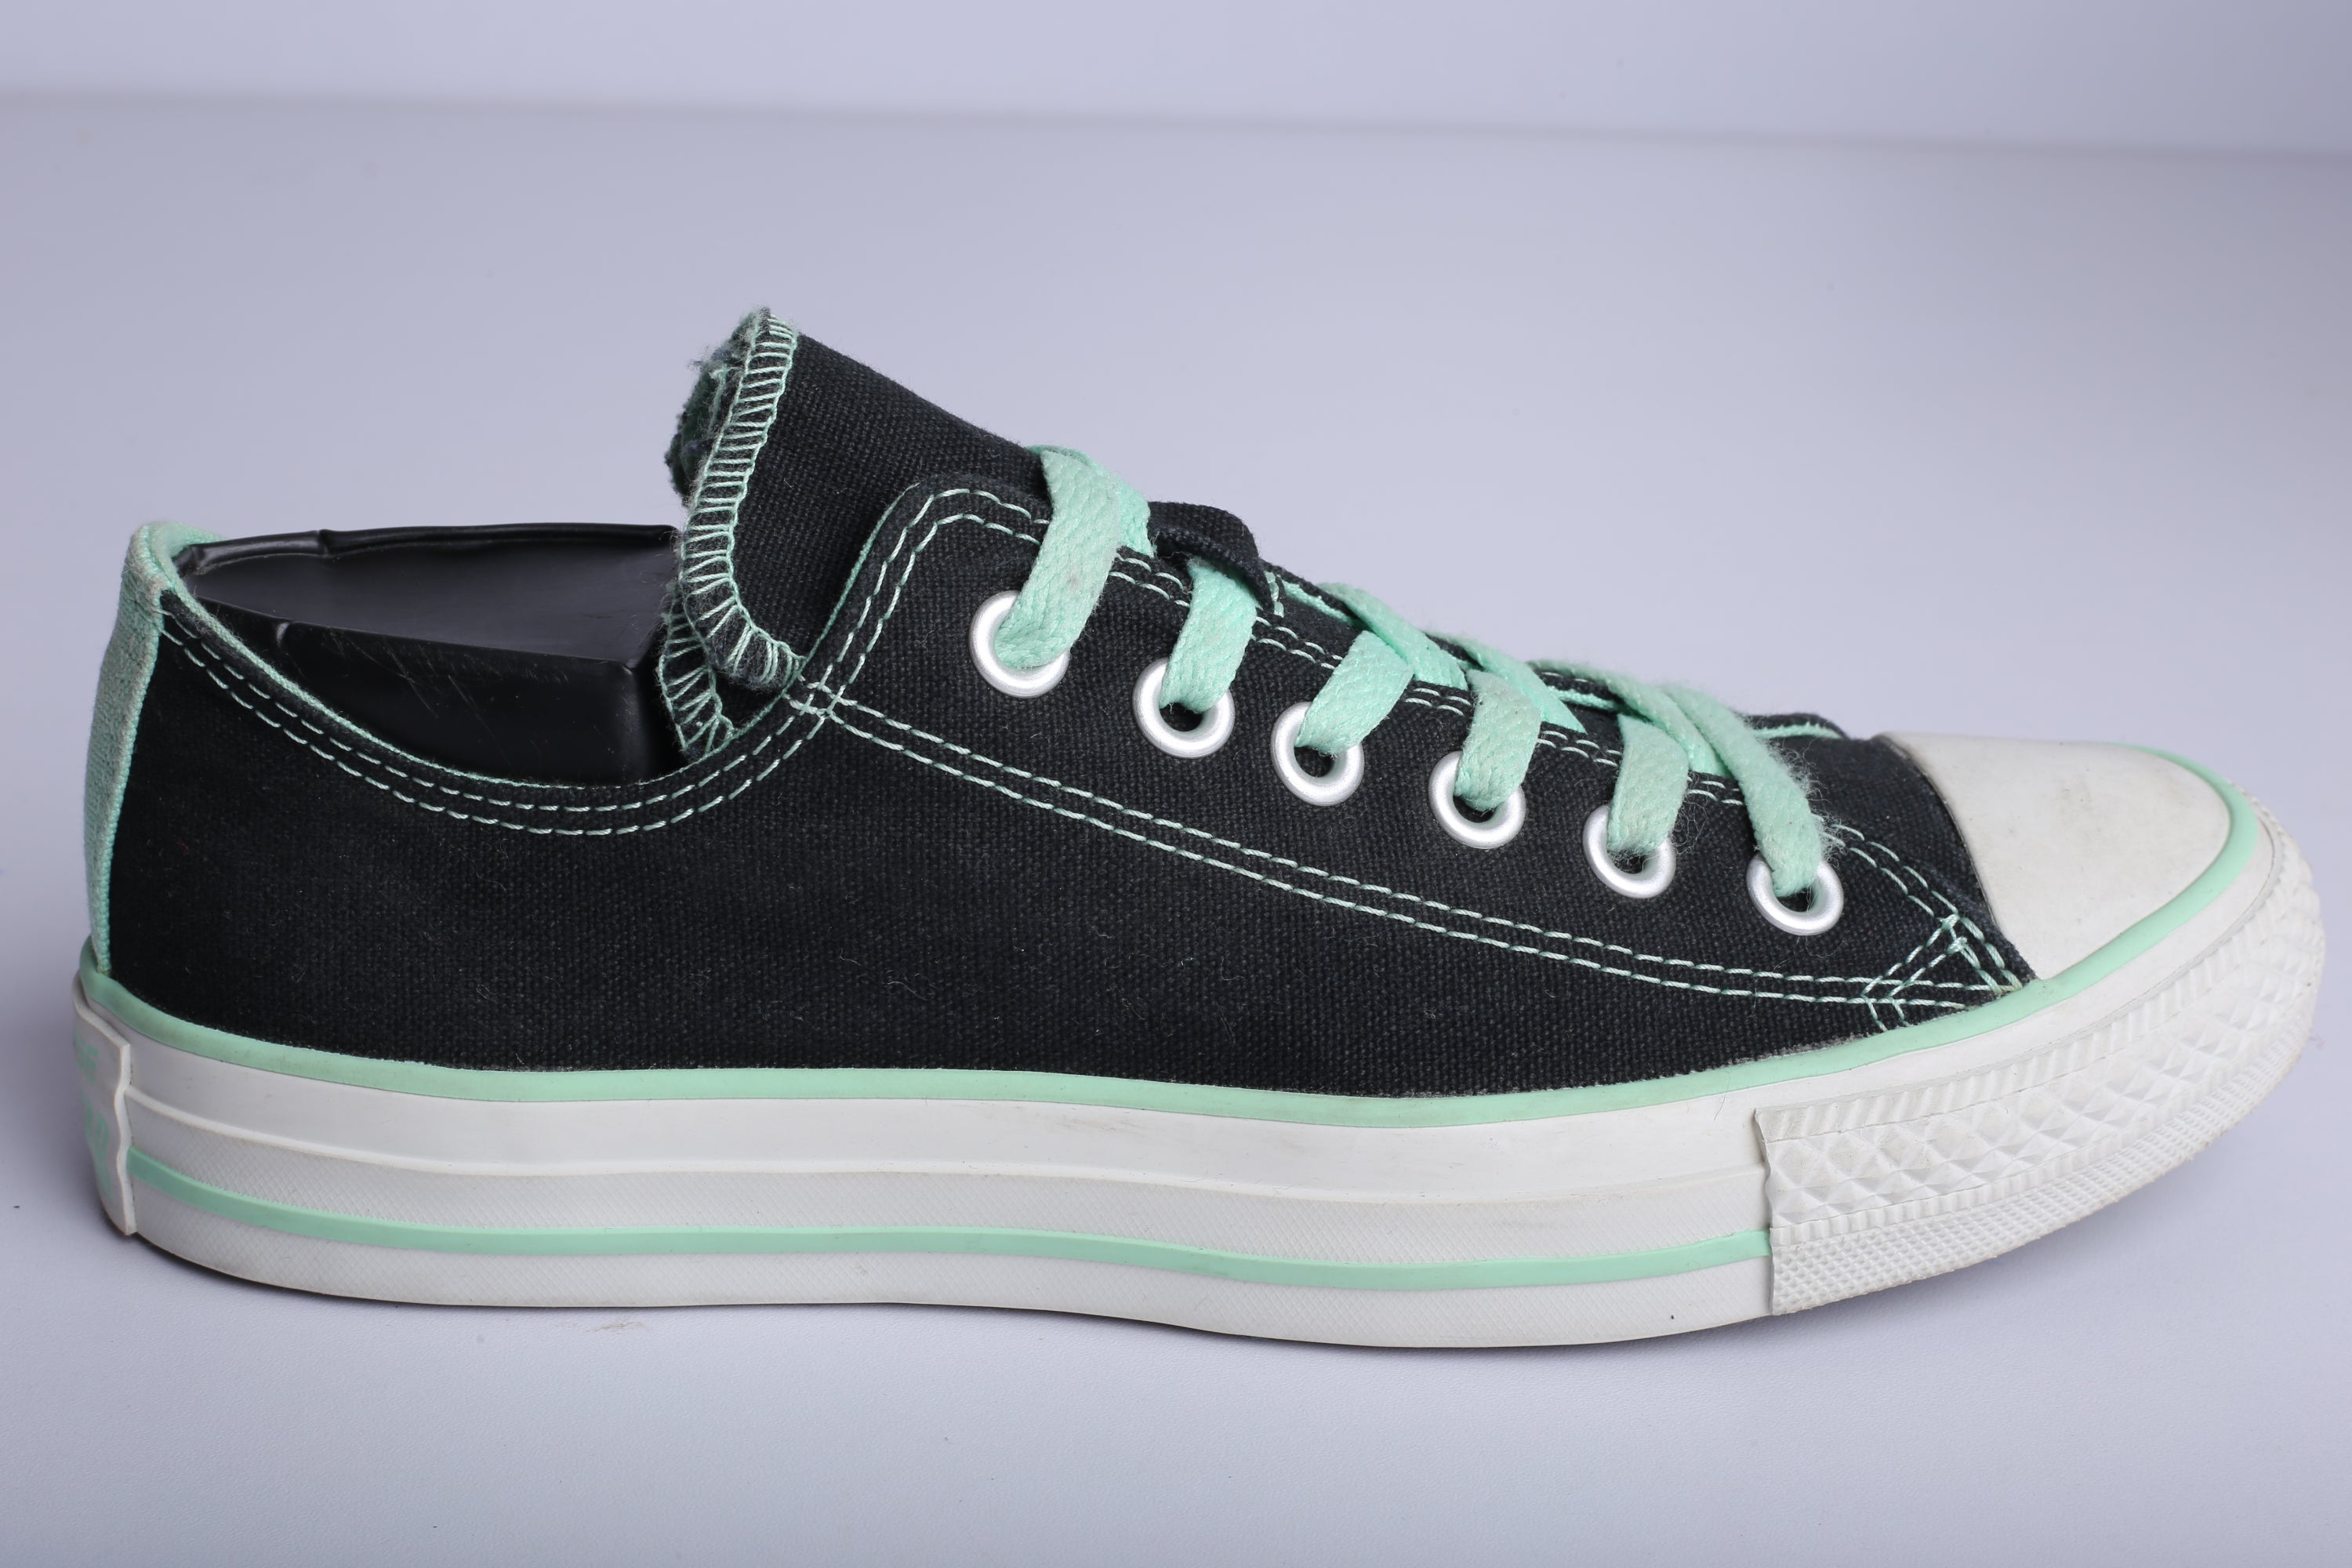 Chuck Taylor All Star Low Teal Black Sneaker - (Condition Premium*)